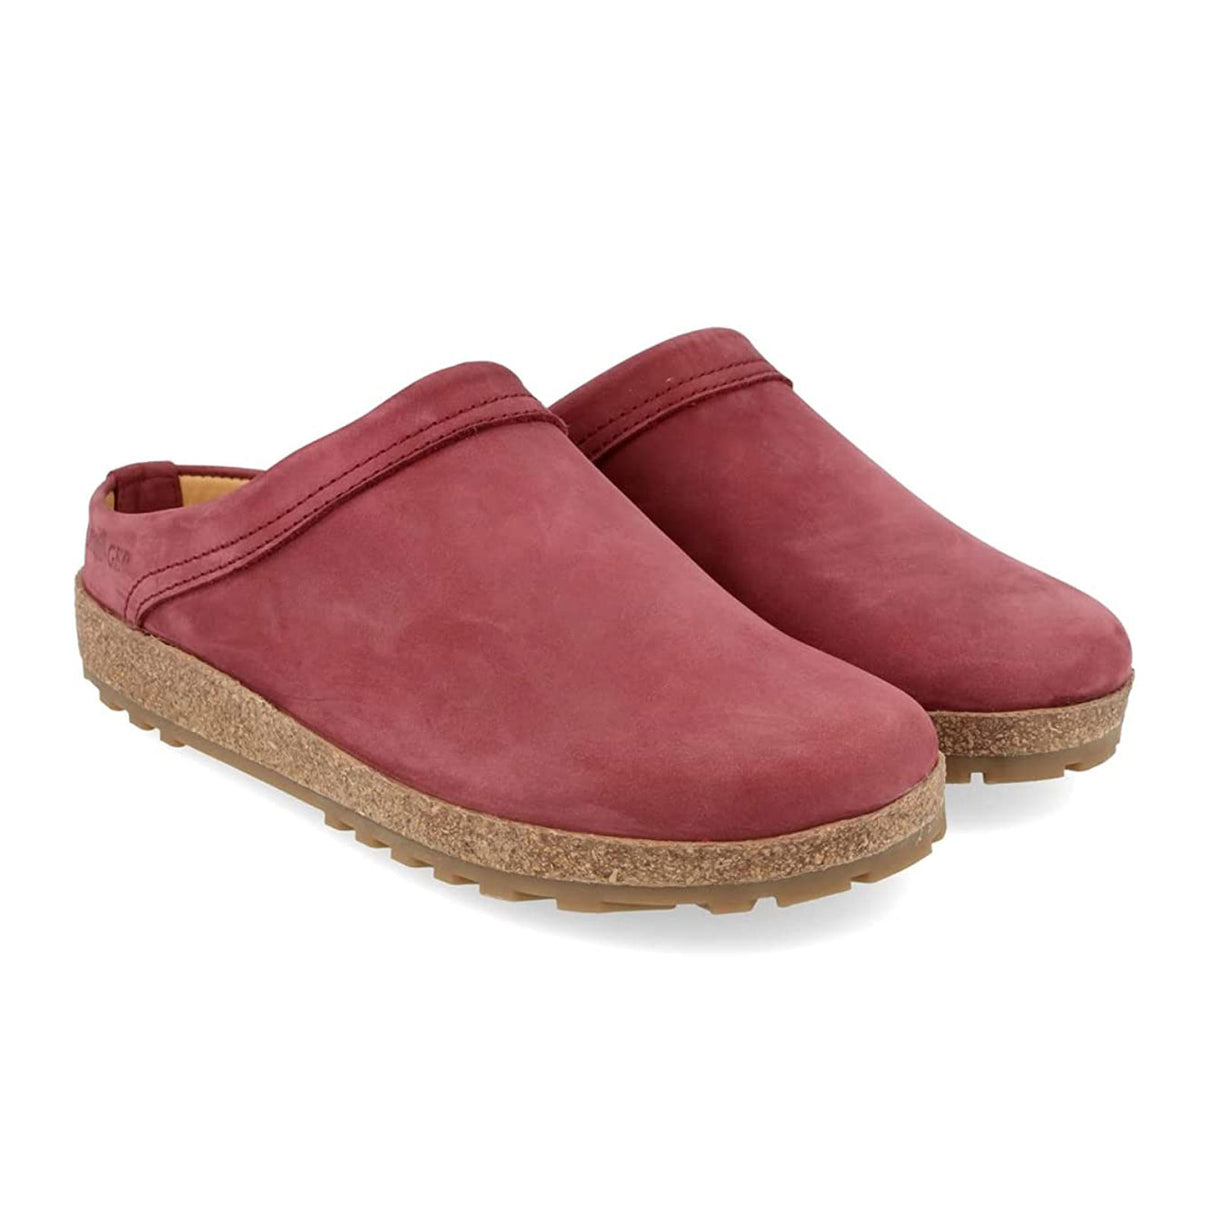 Haflinger Malmo Clog (Women) - Burdeos Leather Dress-Casual - Clogs & Mules - The Heel Shoe Fitters